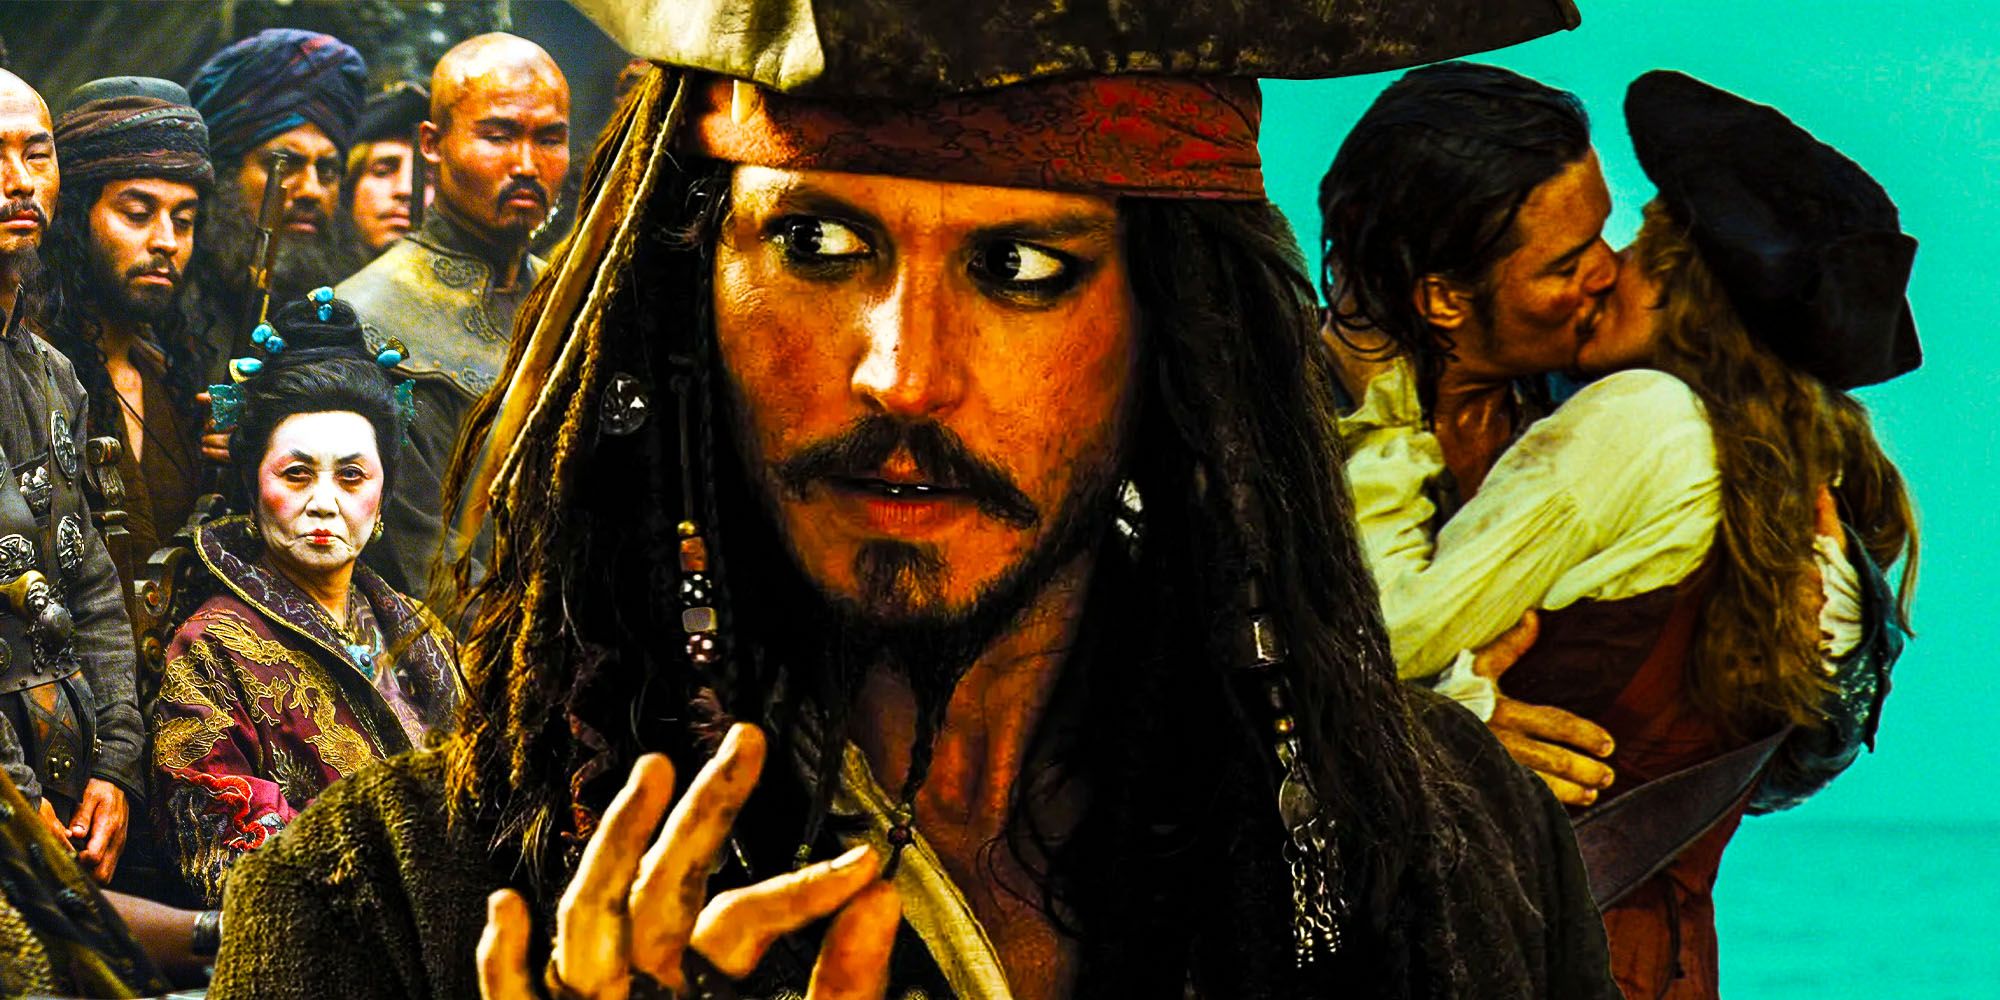 Blended image of several characters from the Pirates of the Caribbean franchise